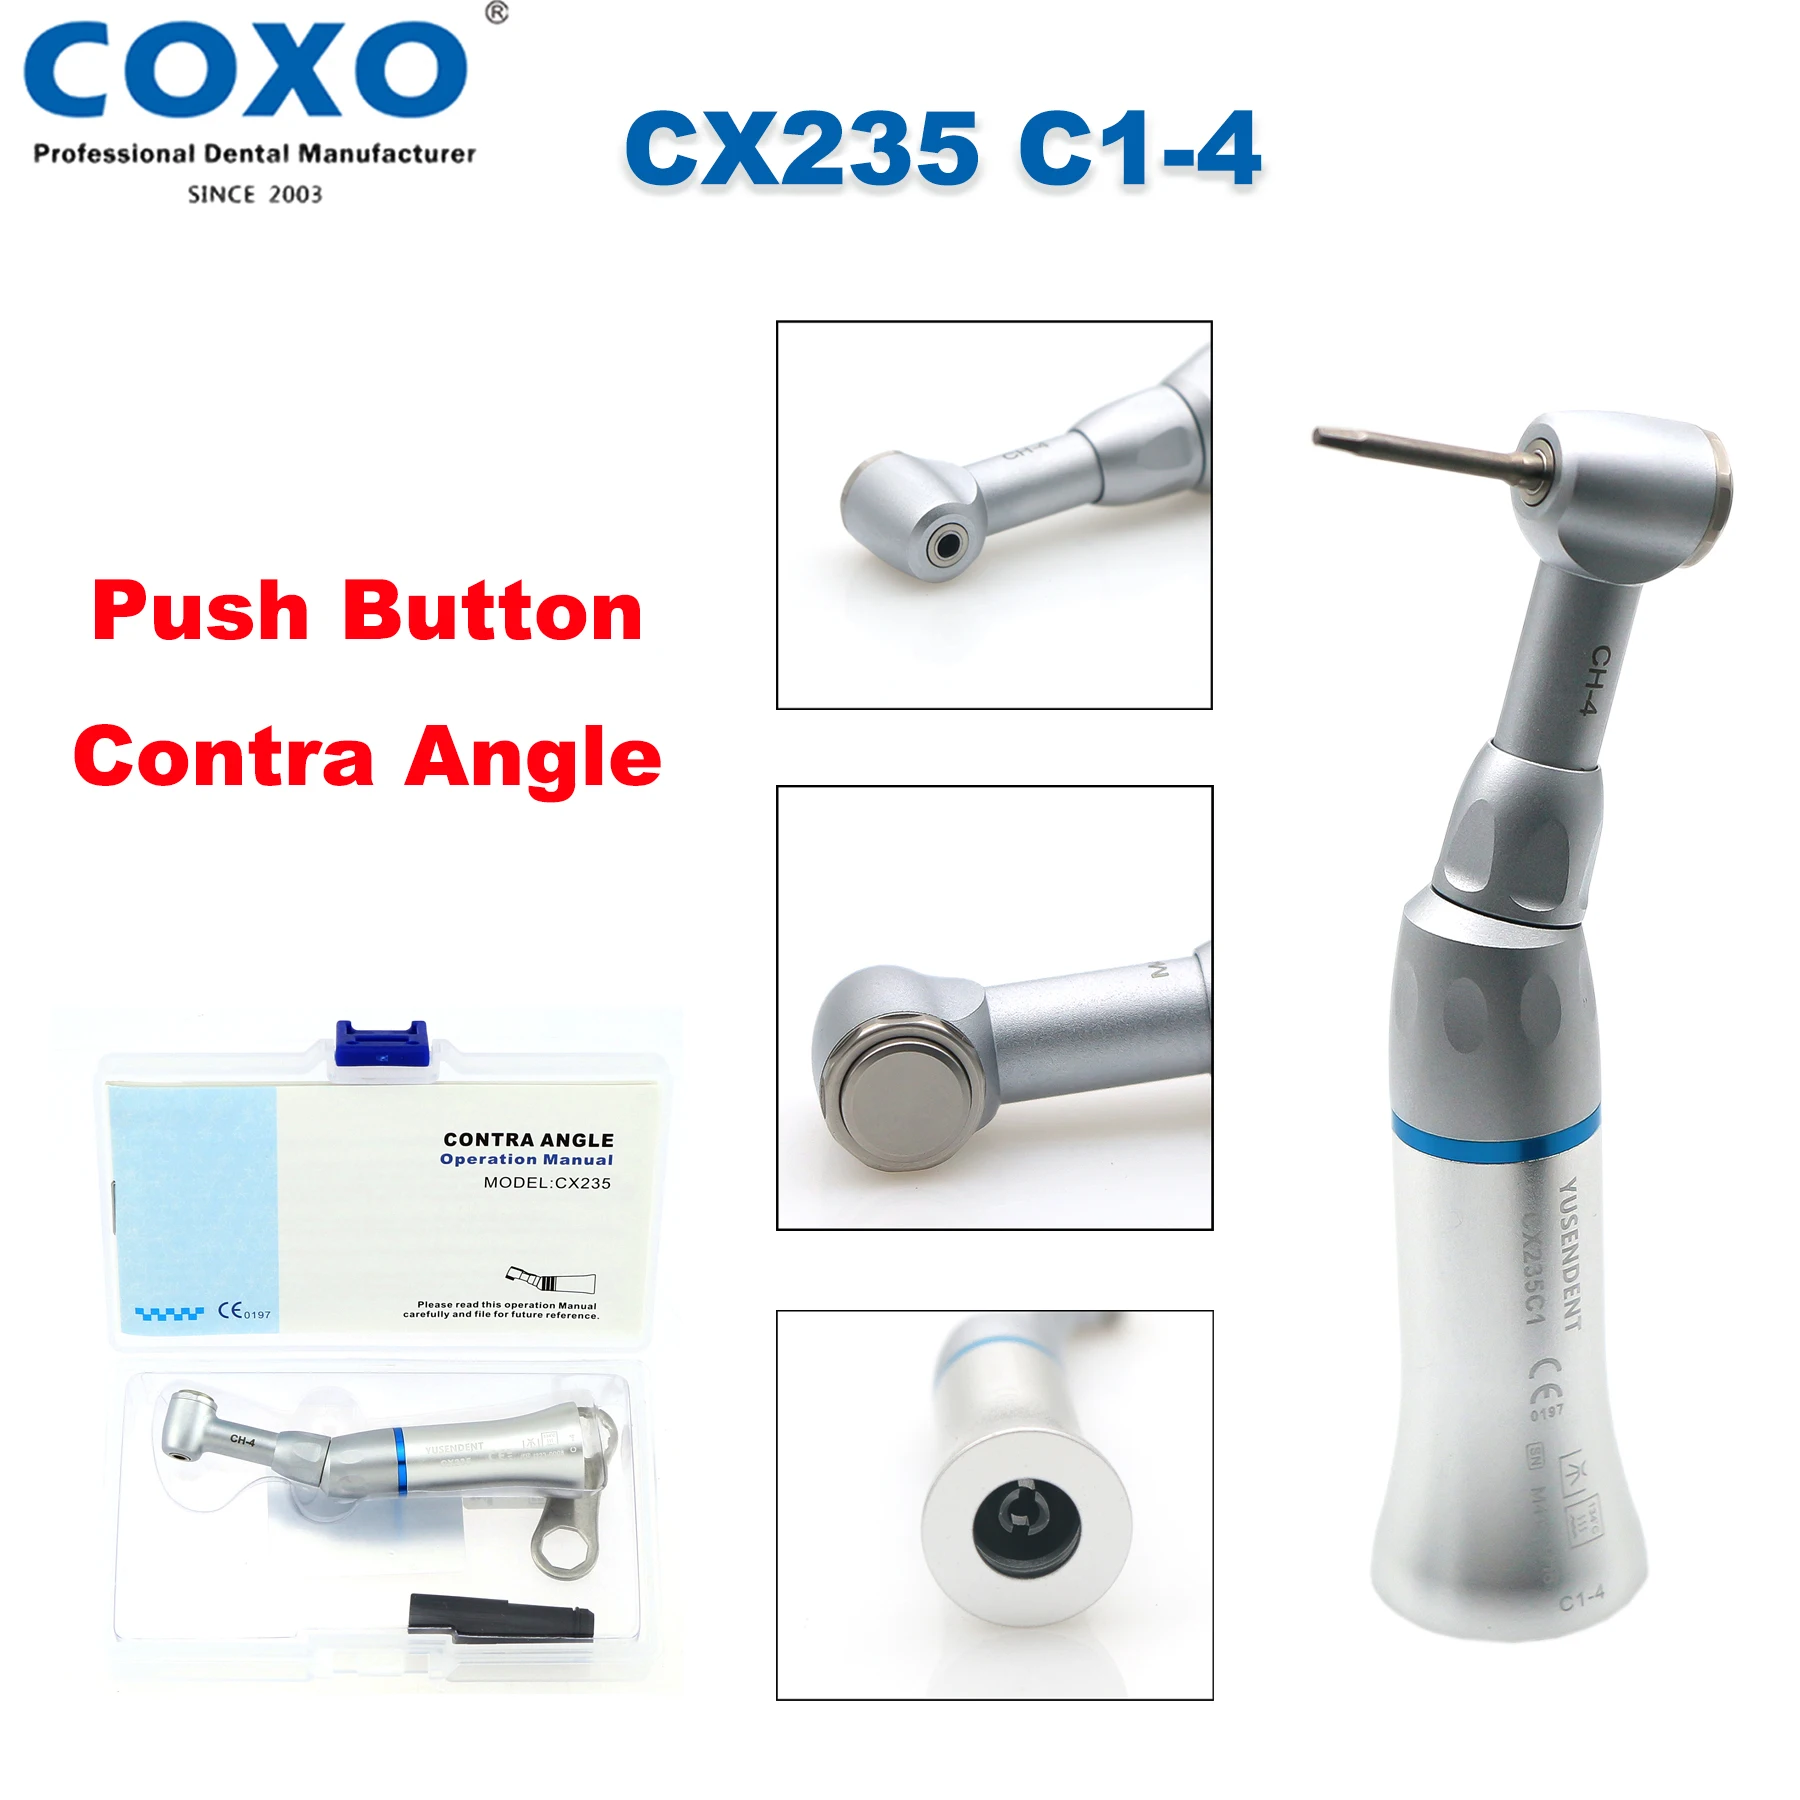 

COXO YUSENDENT Dental 1:1 Contra Angle Low Speed Handpiece Push Button Wrench Head E Type Fit NSK EX Series CX235 C1-4